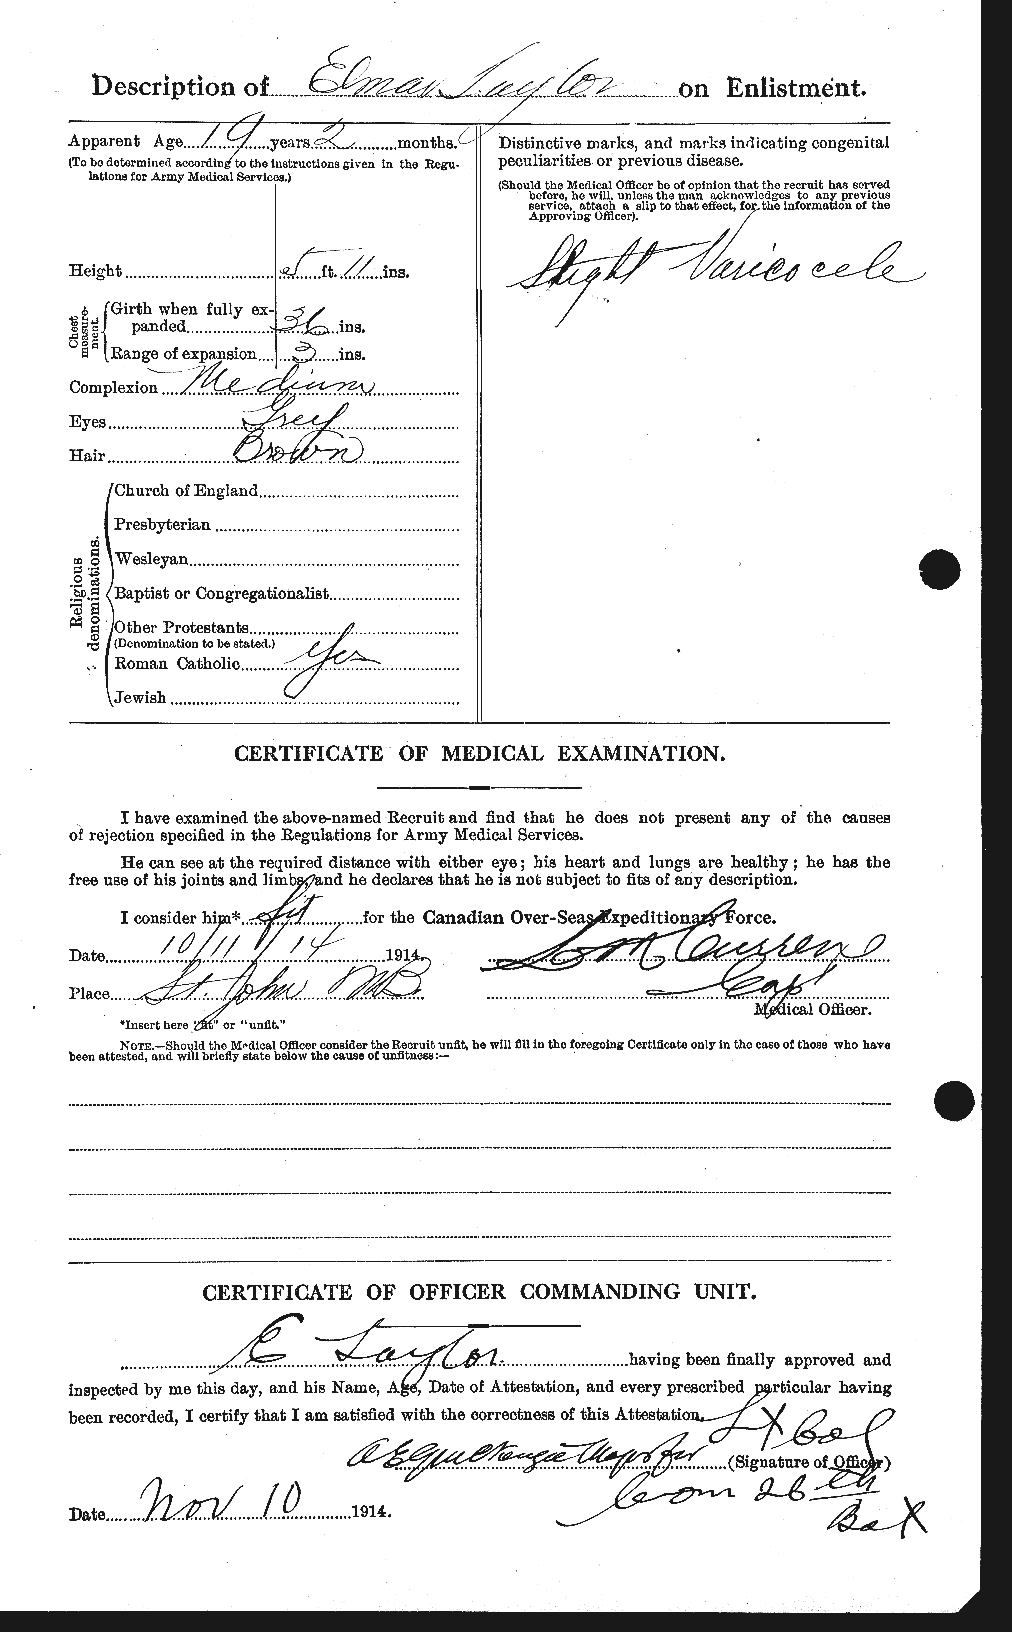 Personnel Records of the First World War - CEF 627351b